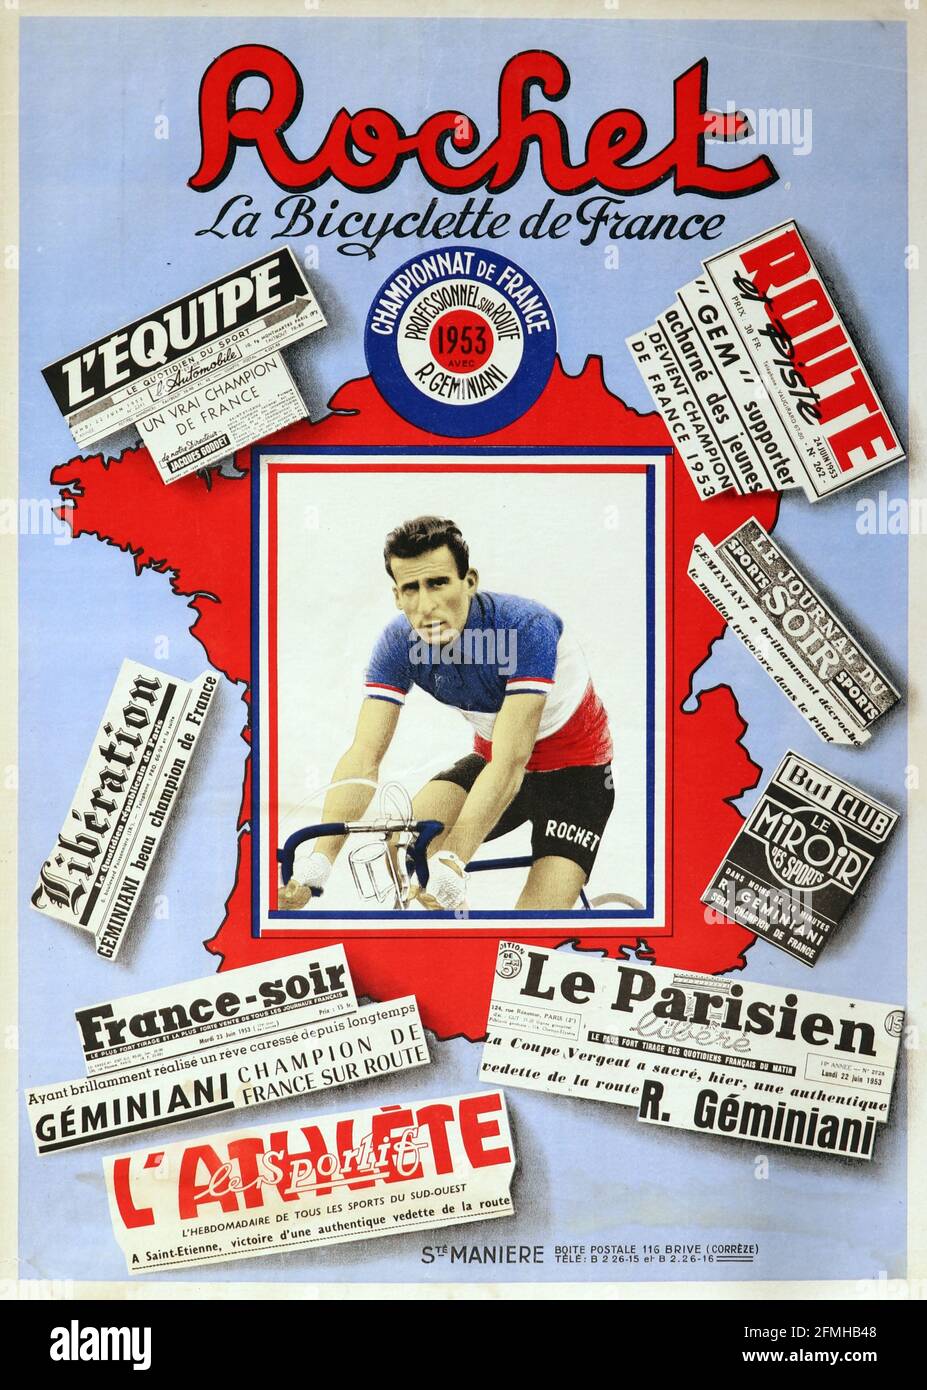 Cycle Rochet La Bicyclette de France 1953. Bicycle advertisement poster. Old and vintage. Digitally enhanced. Tour de France. Stock Photo